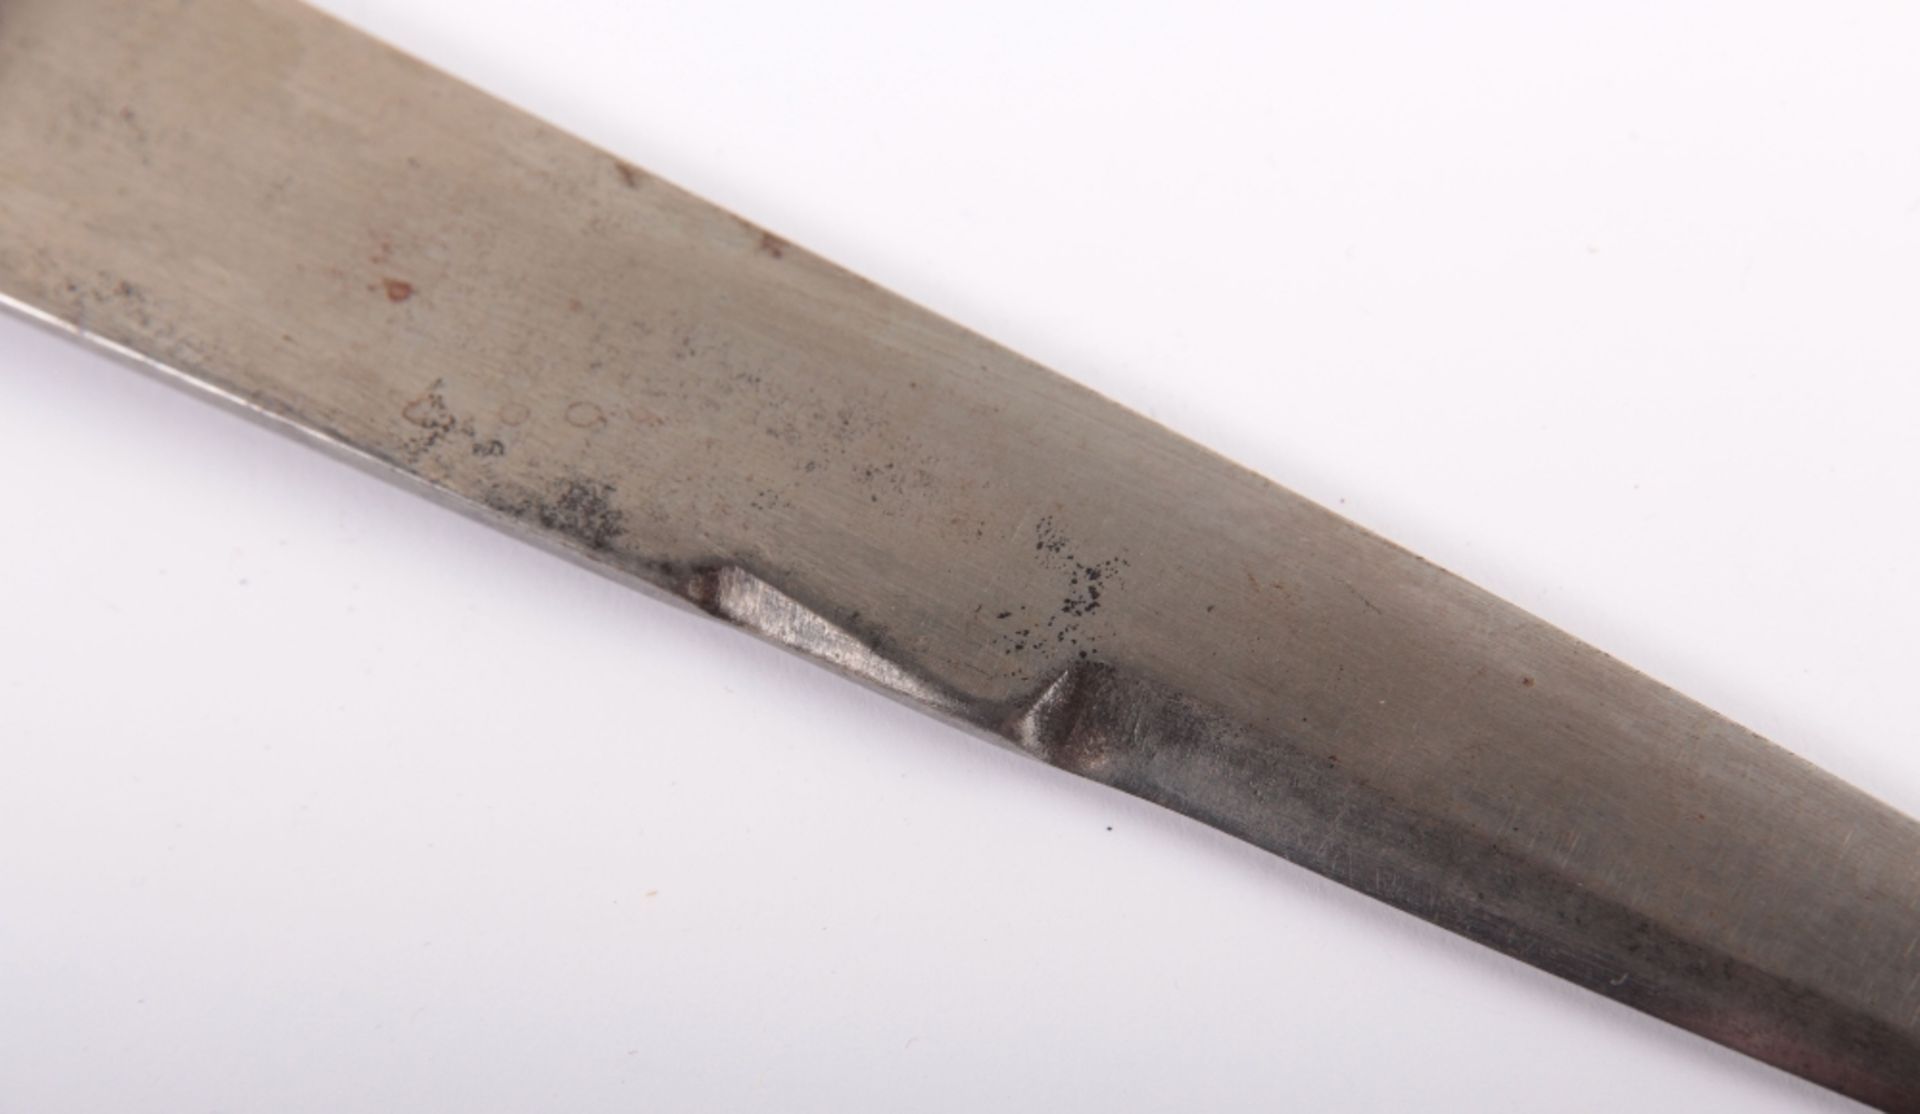 Late 18th Century Silver Mounted Neapolitan Dagger - Image 7 of 10